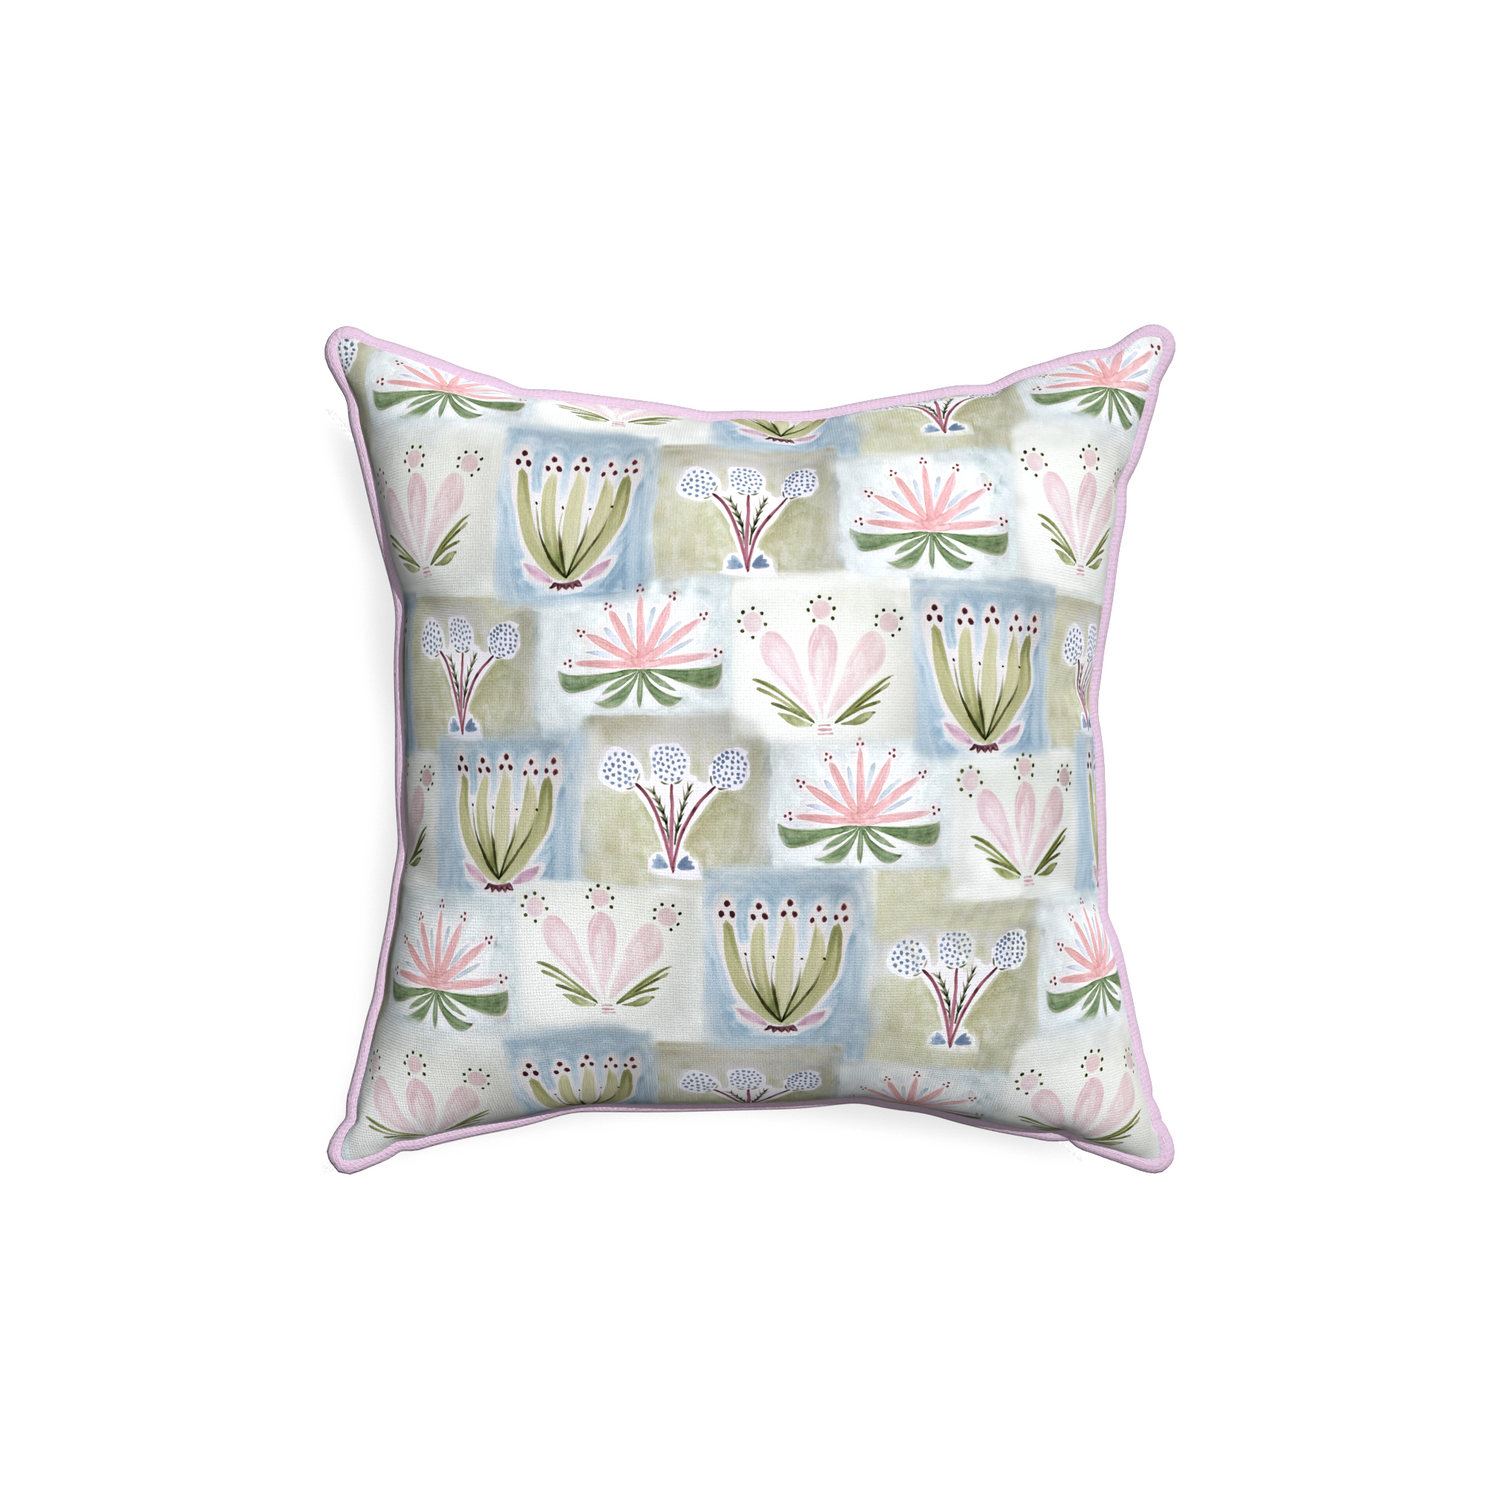 18-square harper custom hand-painted floralpillow with l piping on white background